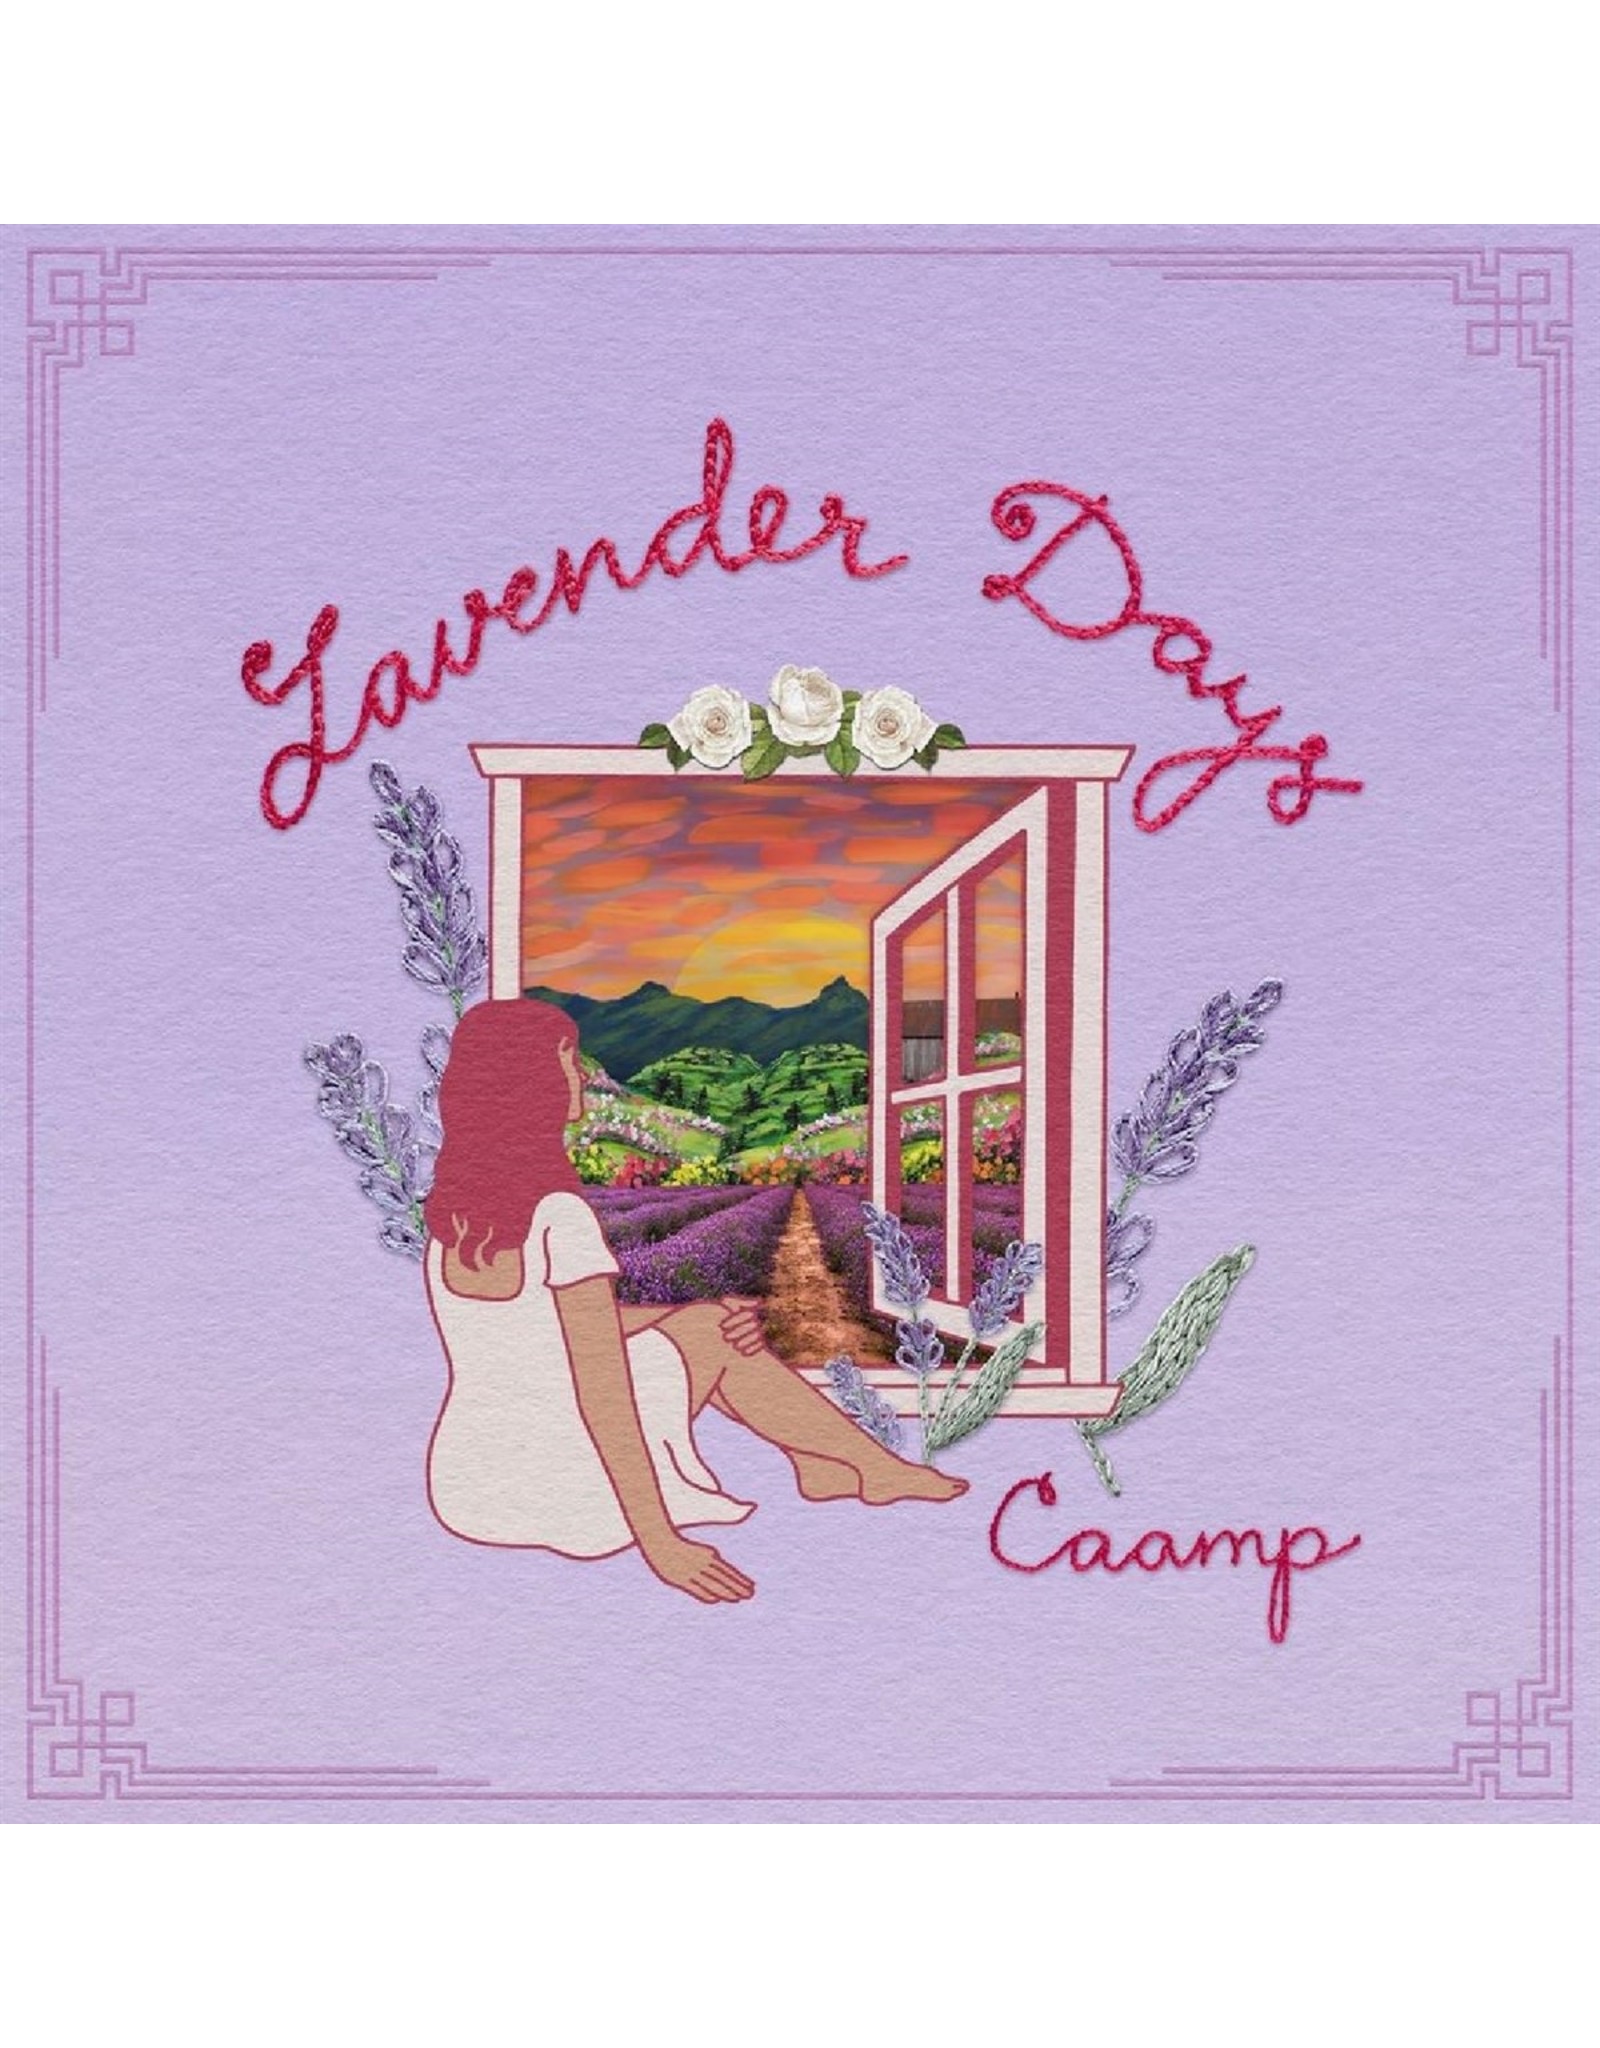 Caamp - Lavender Days PINK AND PURPLE LP